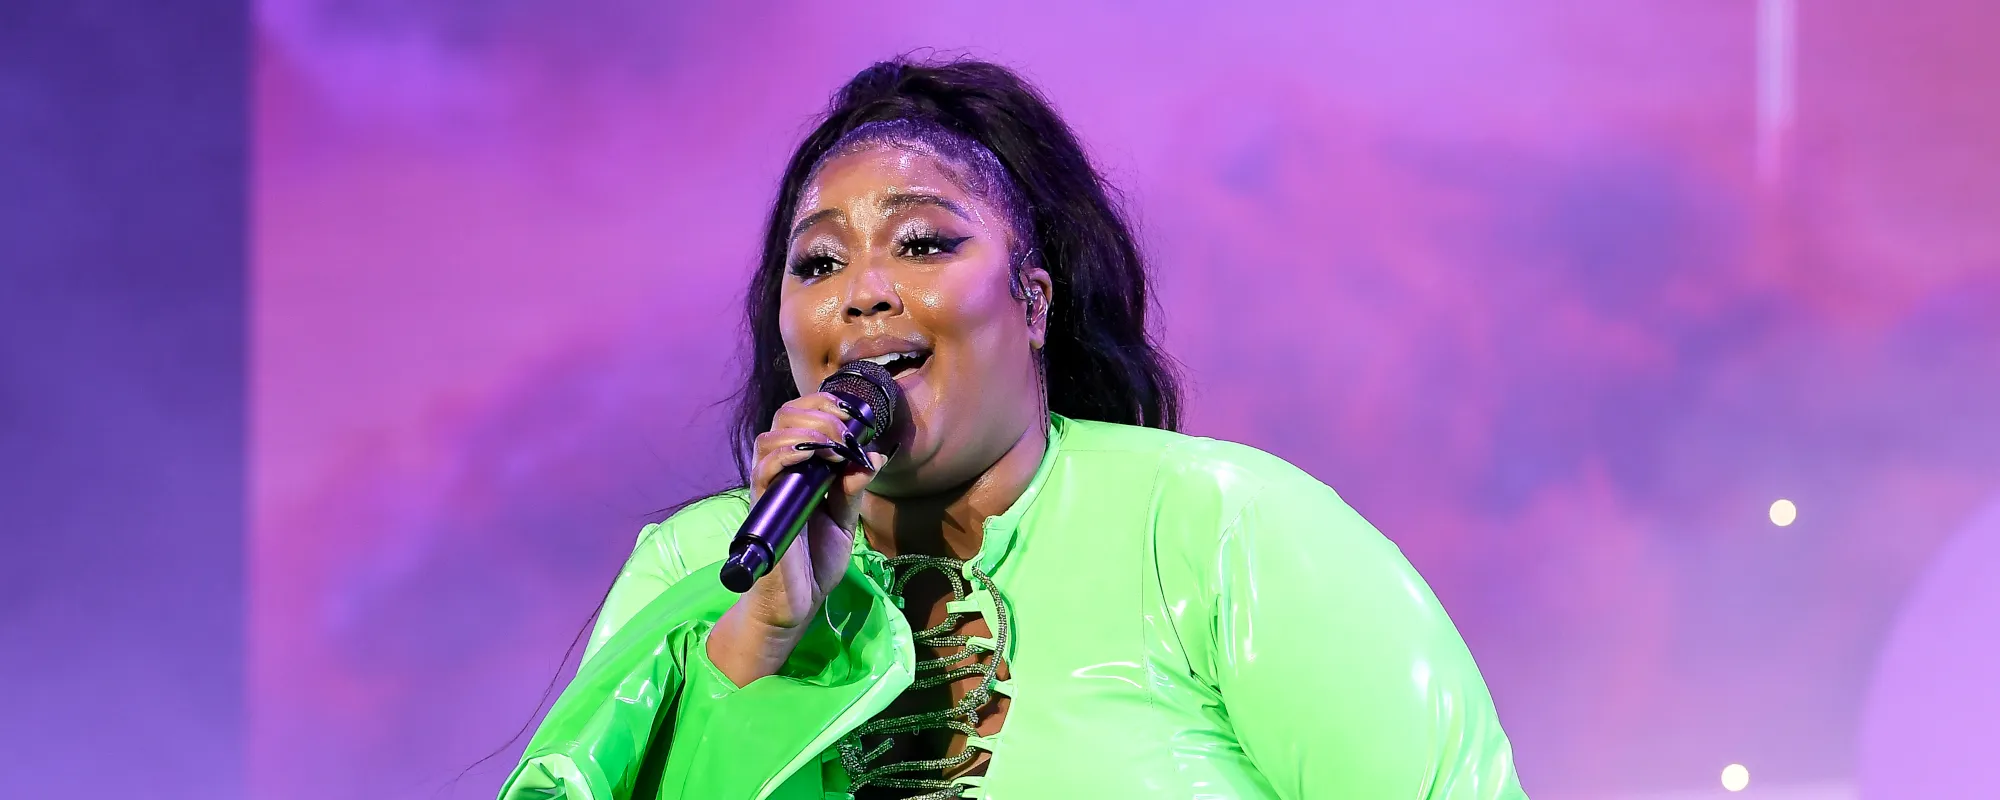 Lizzo Apologizes Update: Lizzo Gets Accused of Ableism for Lyric Choice in Latest Song “Grrrls”